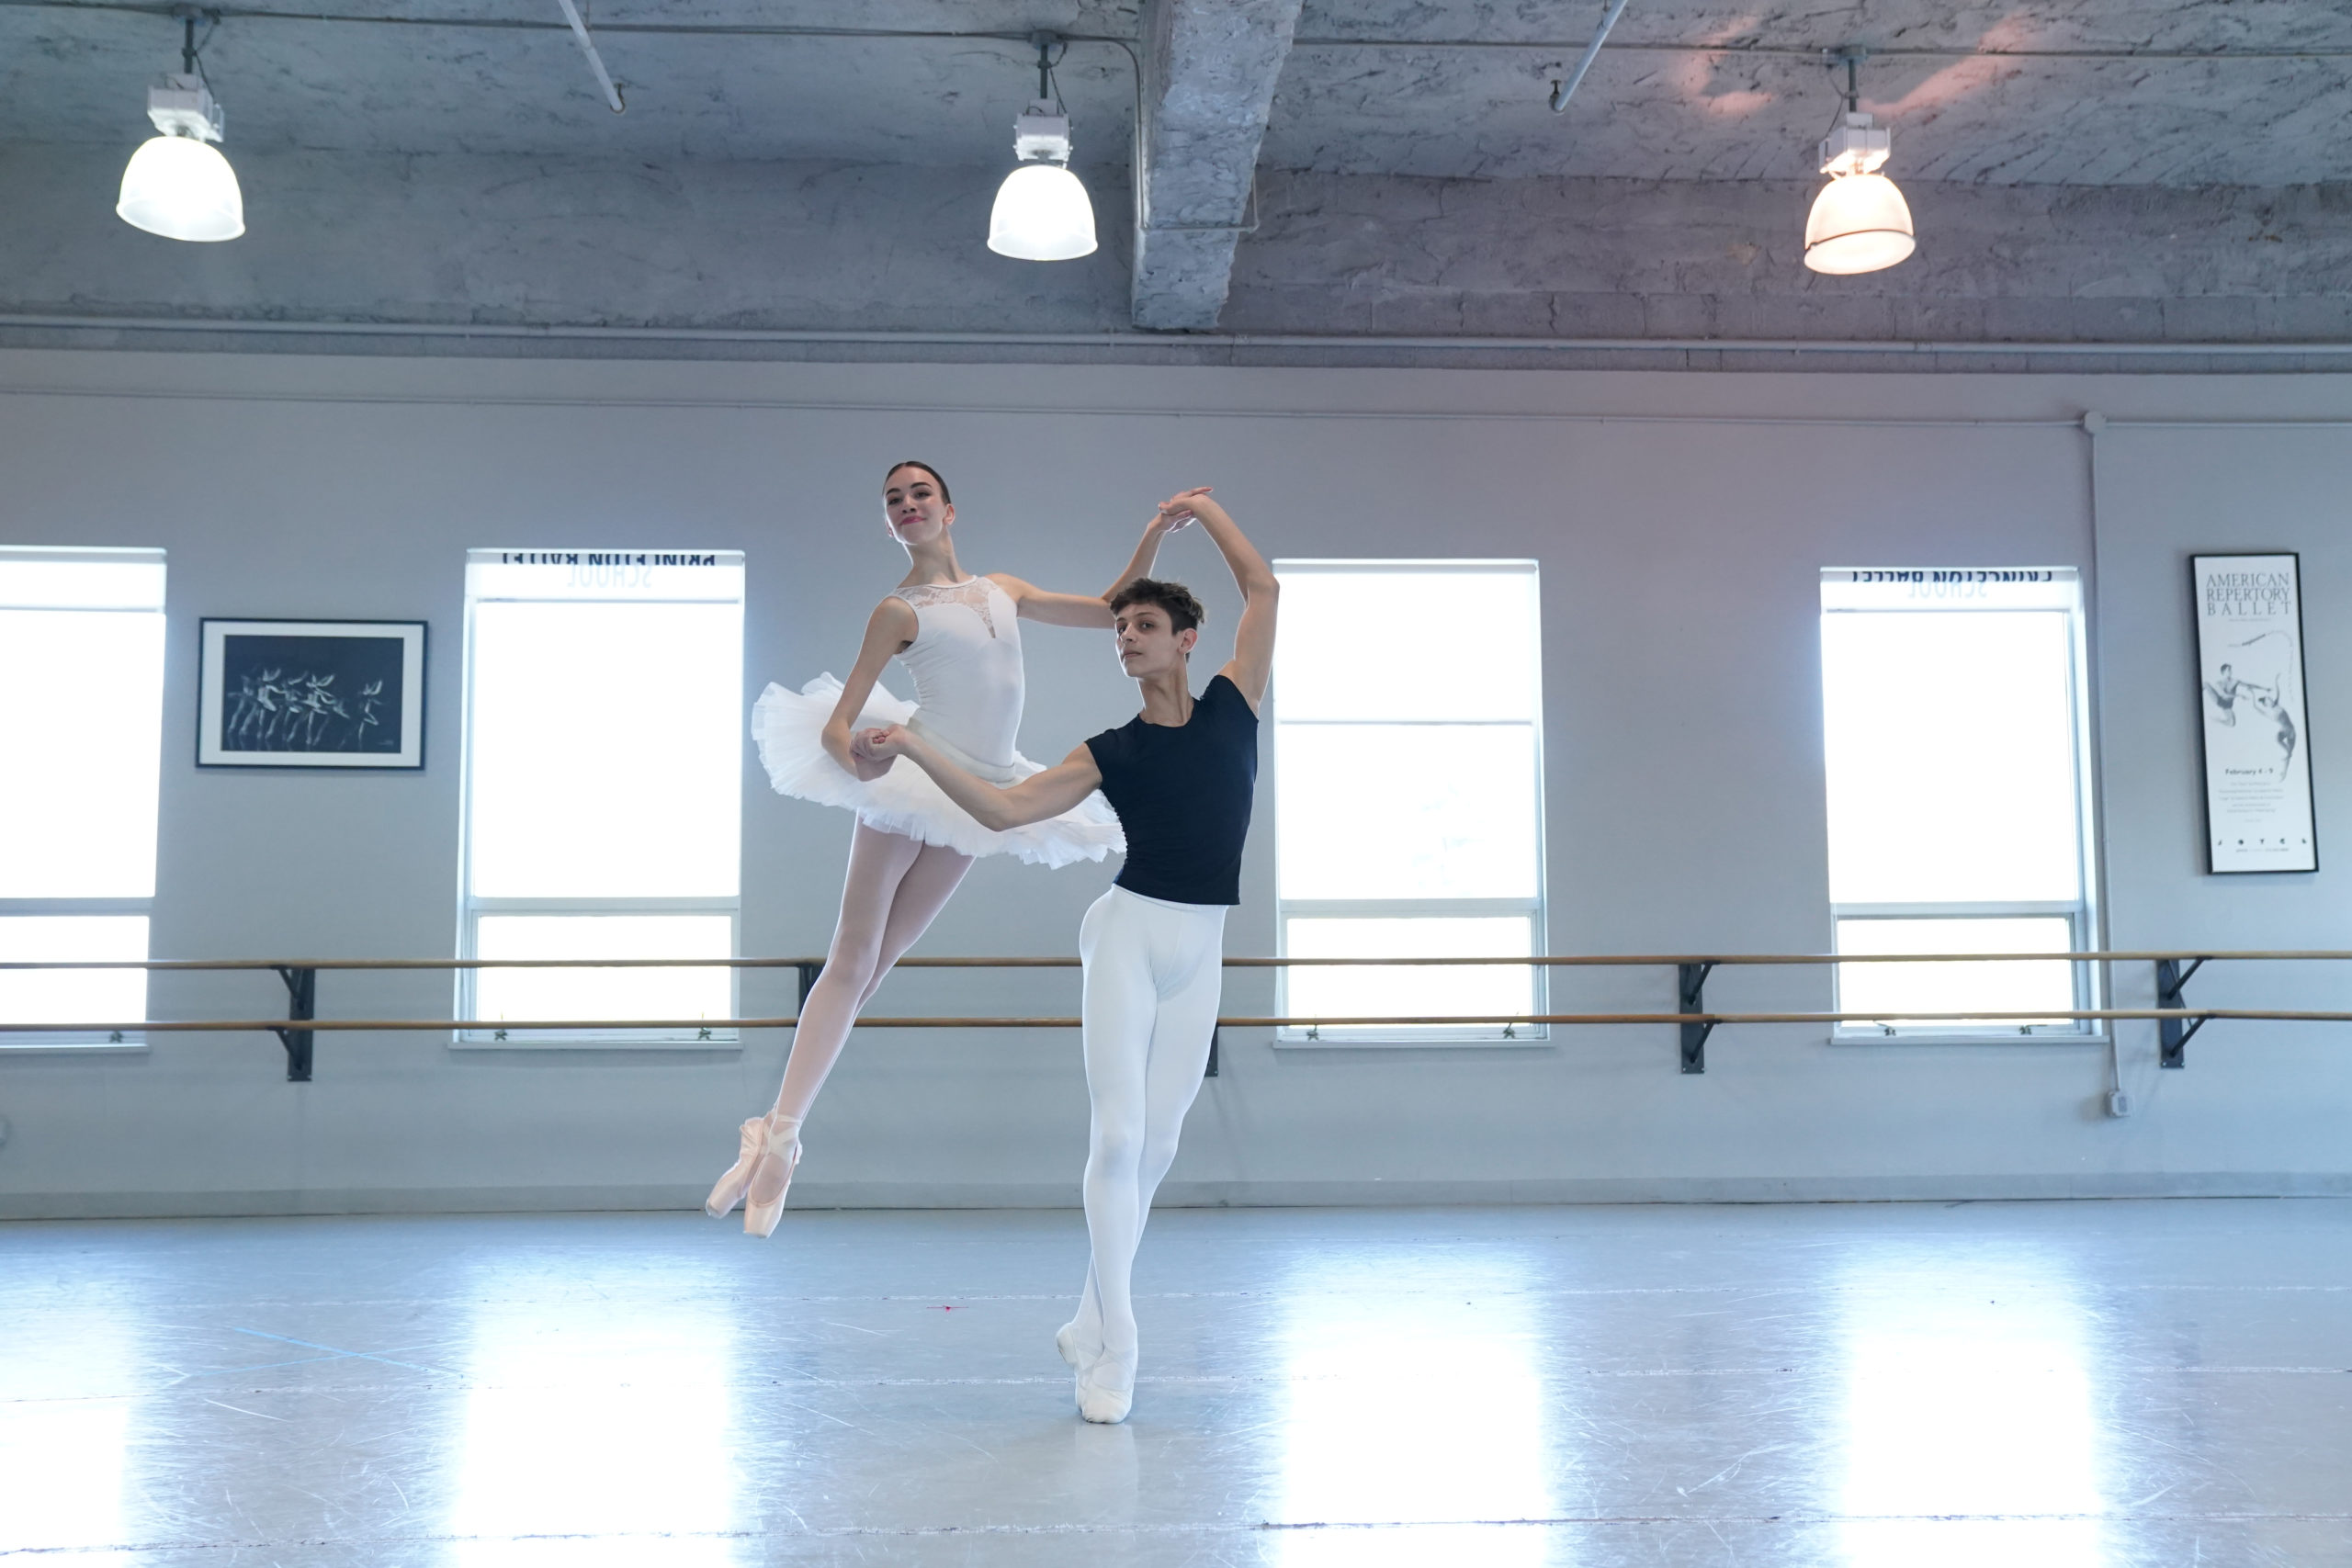 Two dancers in studio, one lifting the other.